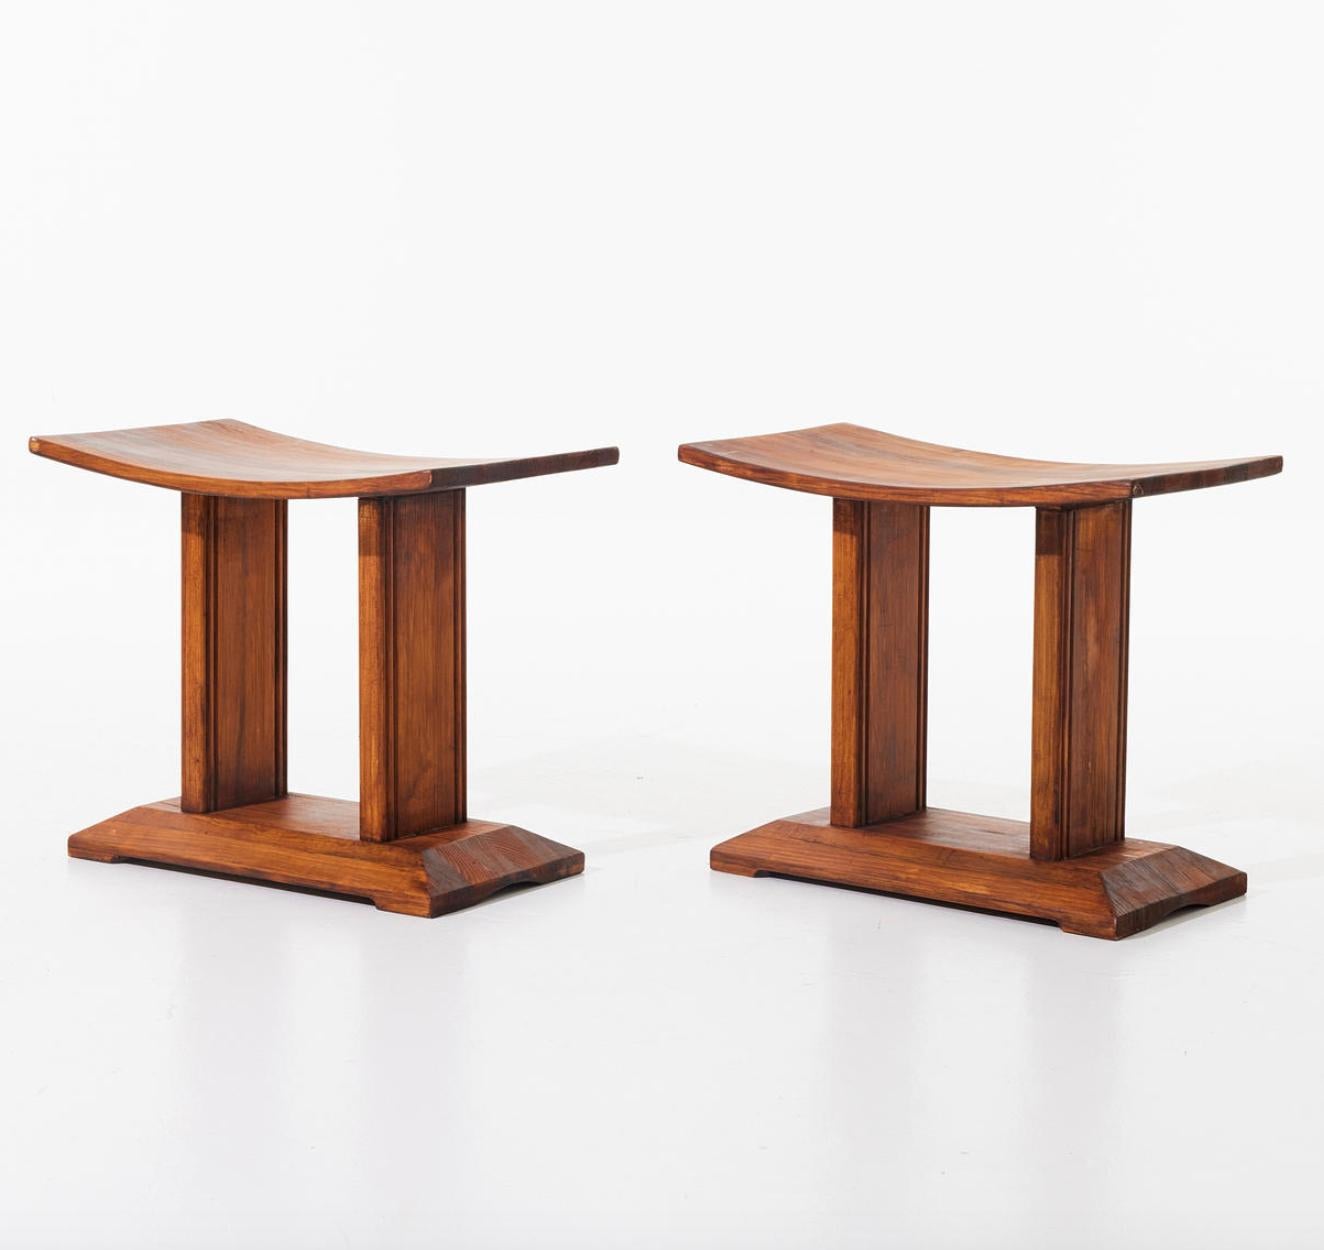 A pair of Swedish pine stools. Stained pine with curved seats. Late 20th century.

H 17.3″.